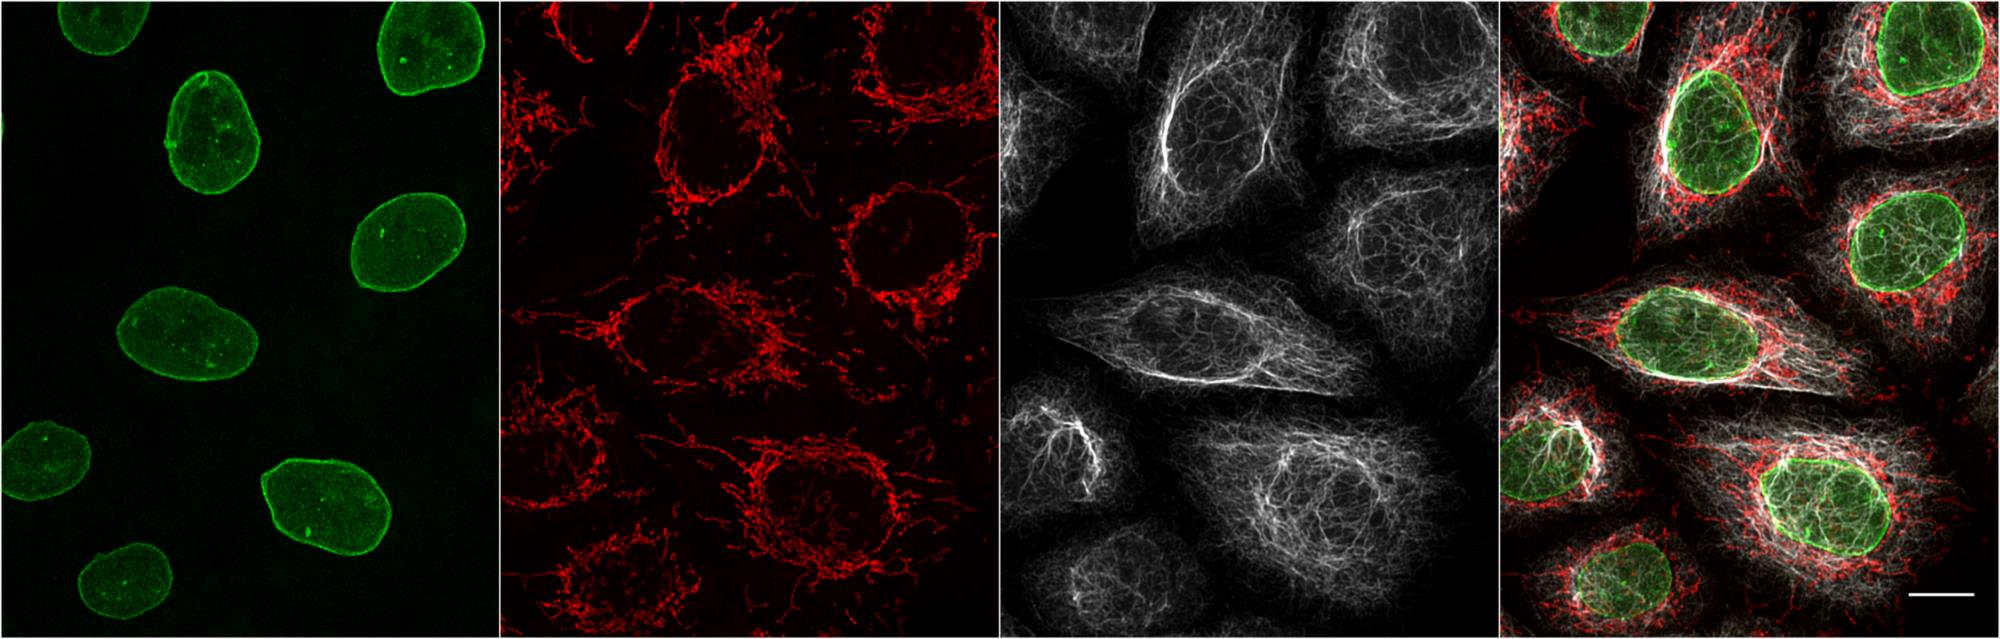 One-step immunostaining is the simultaneous incubation of mouse IgG1 primary antibody and anti-mouse IgG1 Nano-Secondary. This method reduces incubation and hands-on time. Simultaneous incubation also supports multiplexing, tissue penetration, and cell staining for flow cytometry.